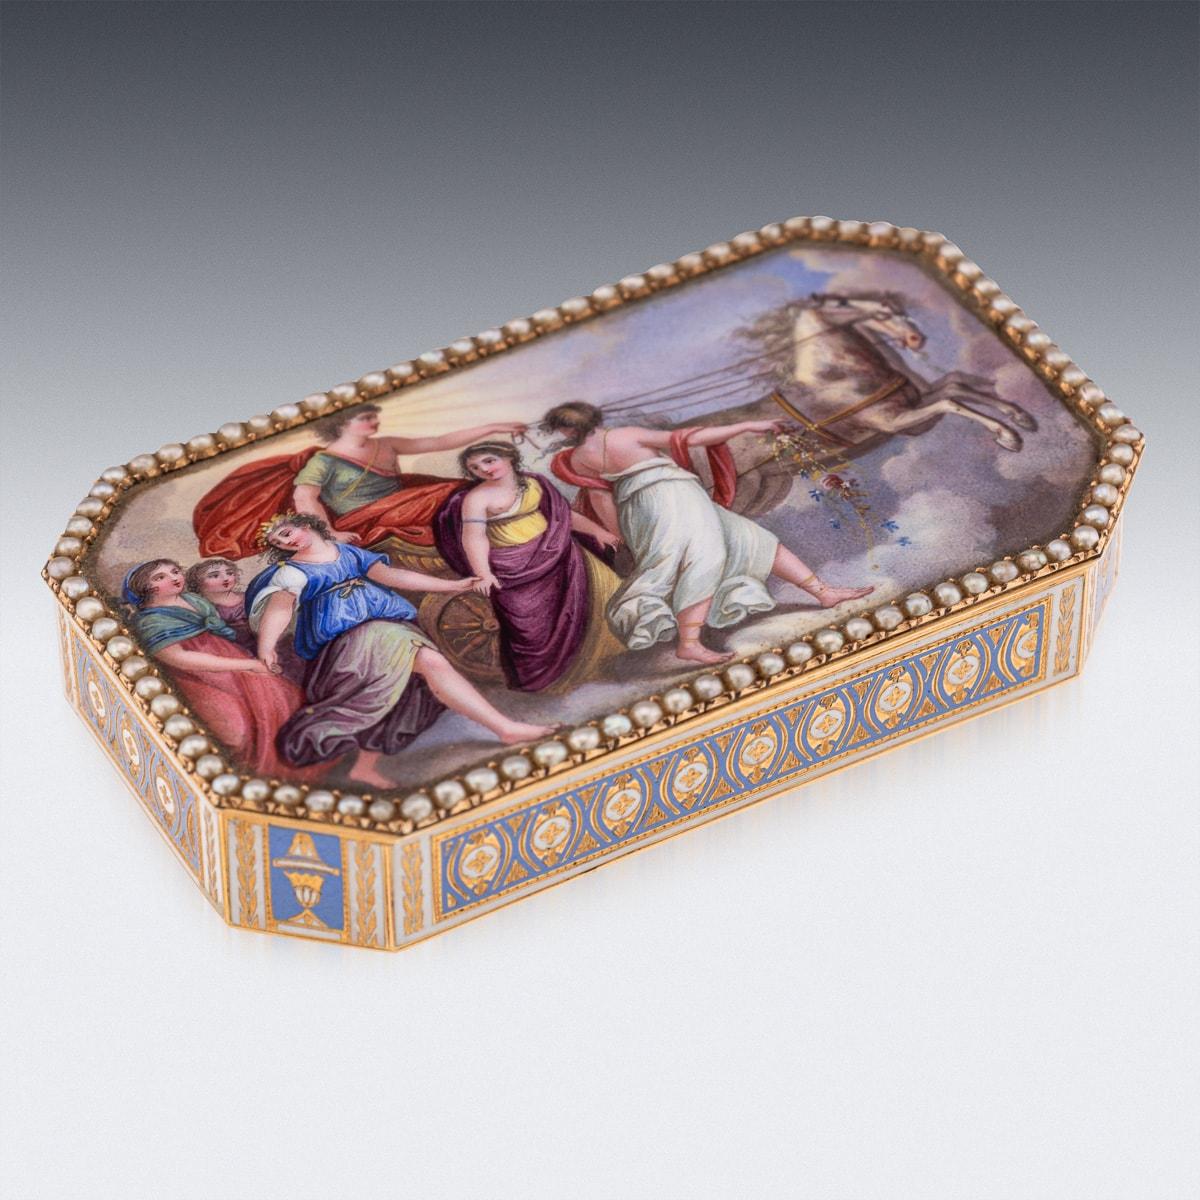 Antique early-19th Century Exceptional Swiss 18k gold & enamel snuff box, rectangular form with gently angled corners, this exquisite piece features sides and underside adorned in a delicate light turquoise enamel, embellished with undulating motifs